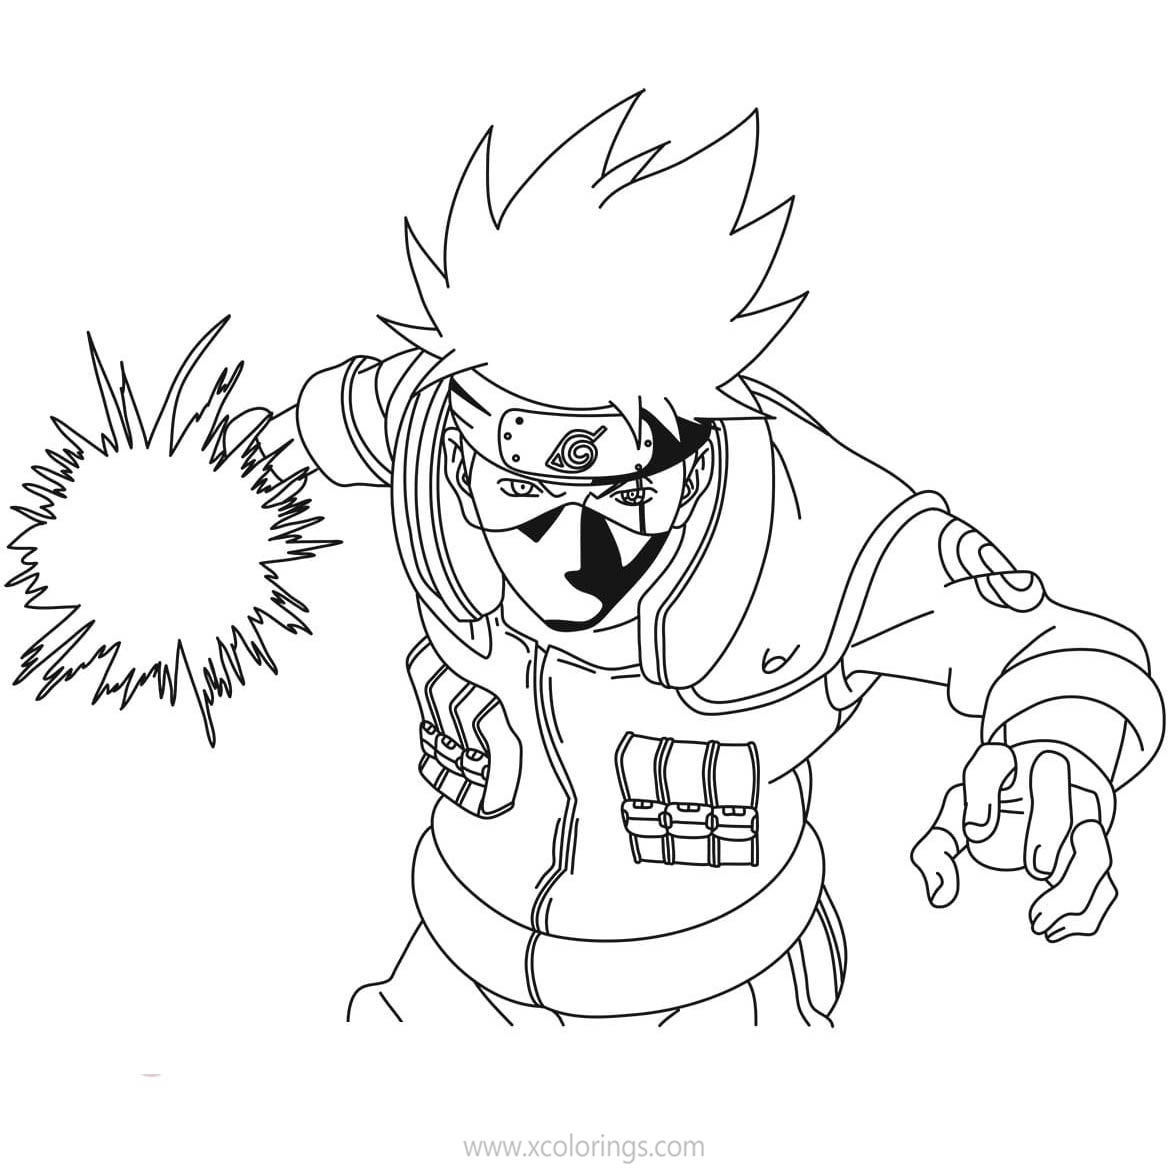 Kakashi Coloring Pages Outline - XColorings.com